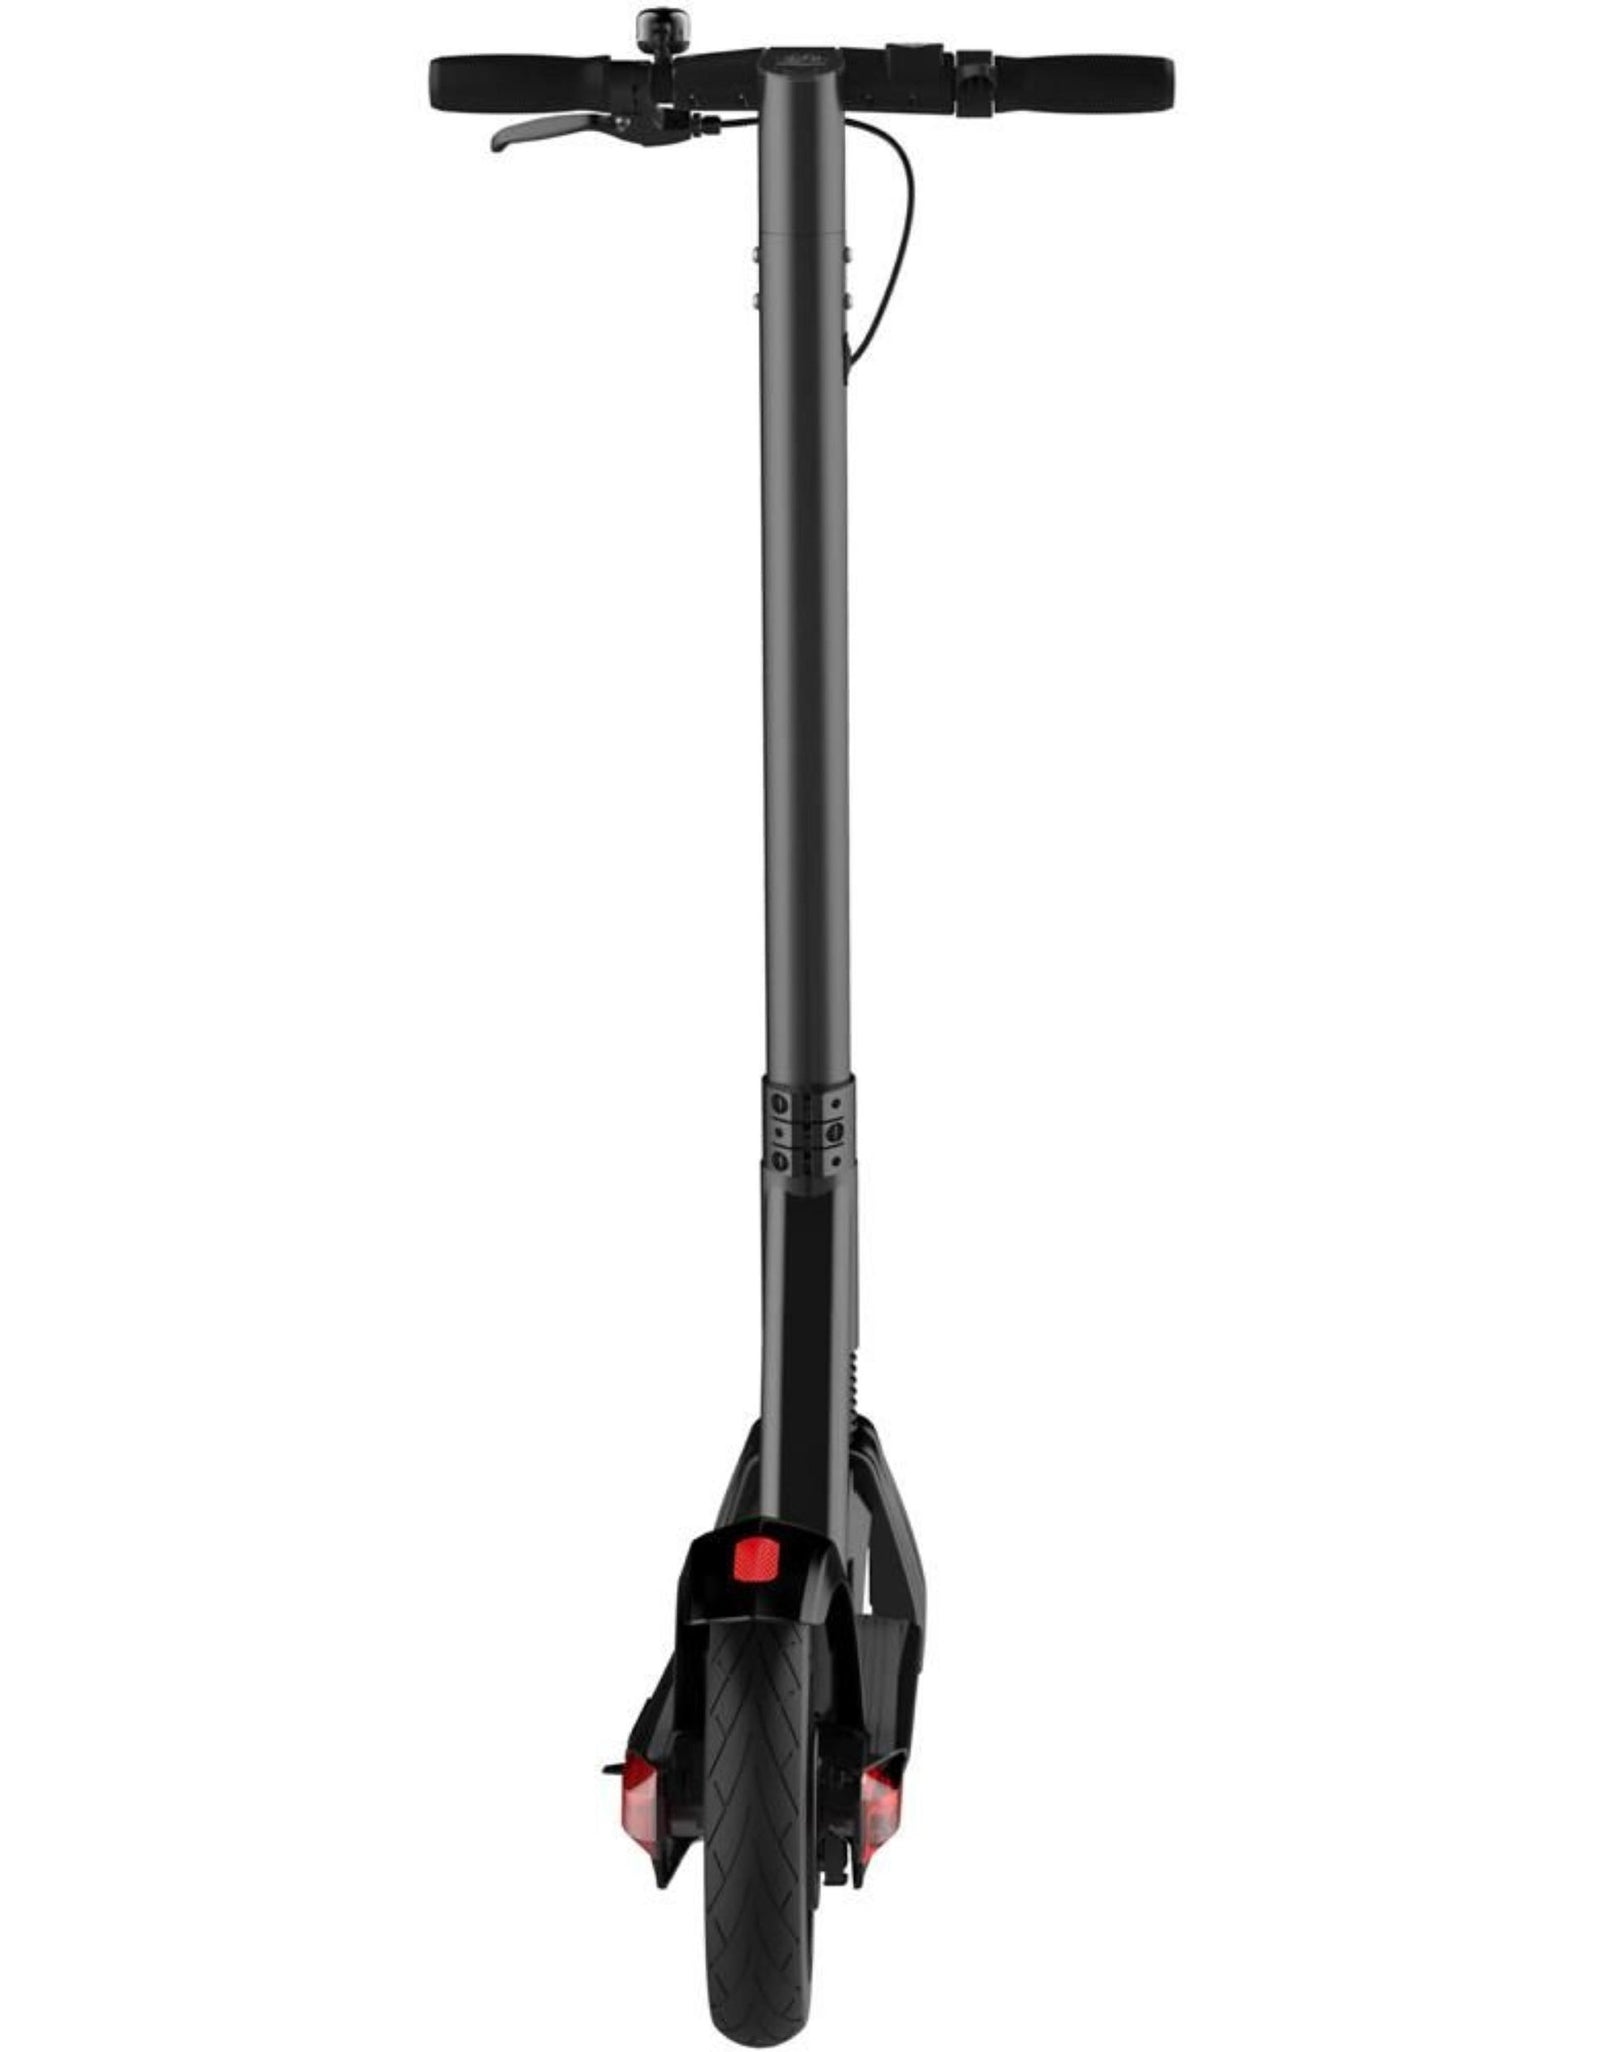 City Pro 36v 8ah 350w Lithium Electric Scooter Black